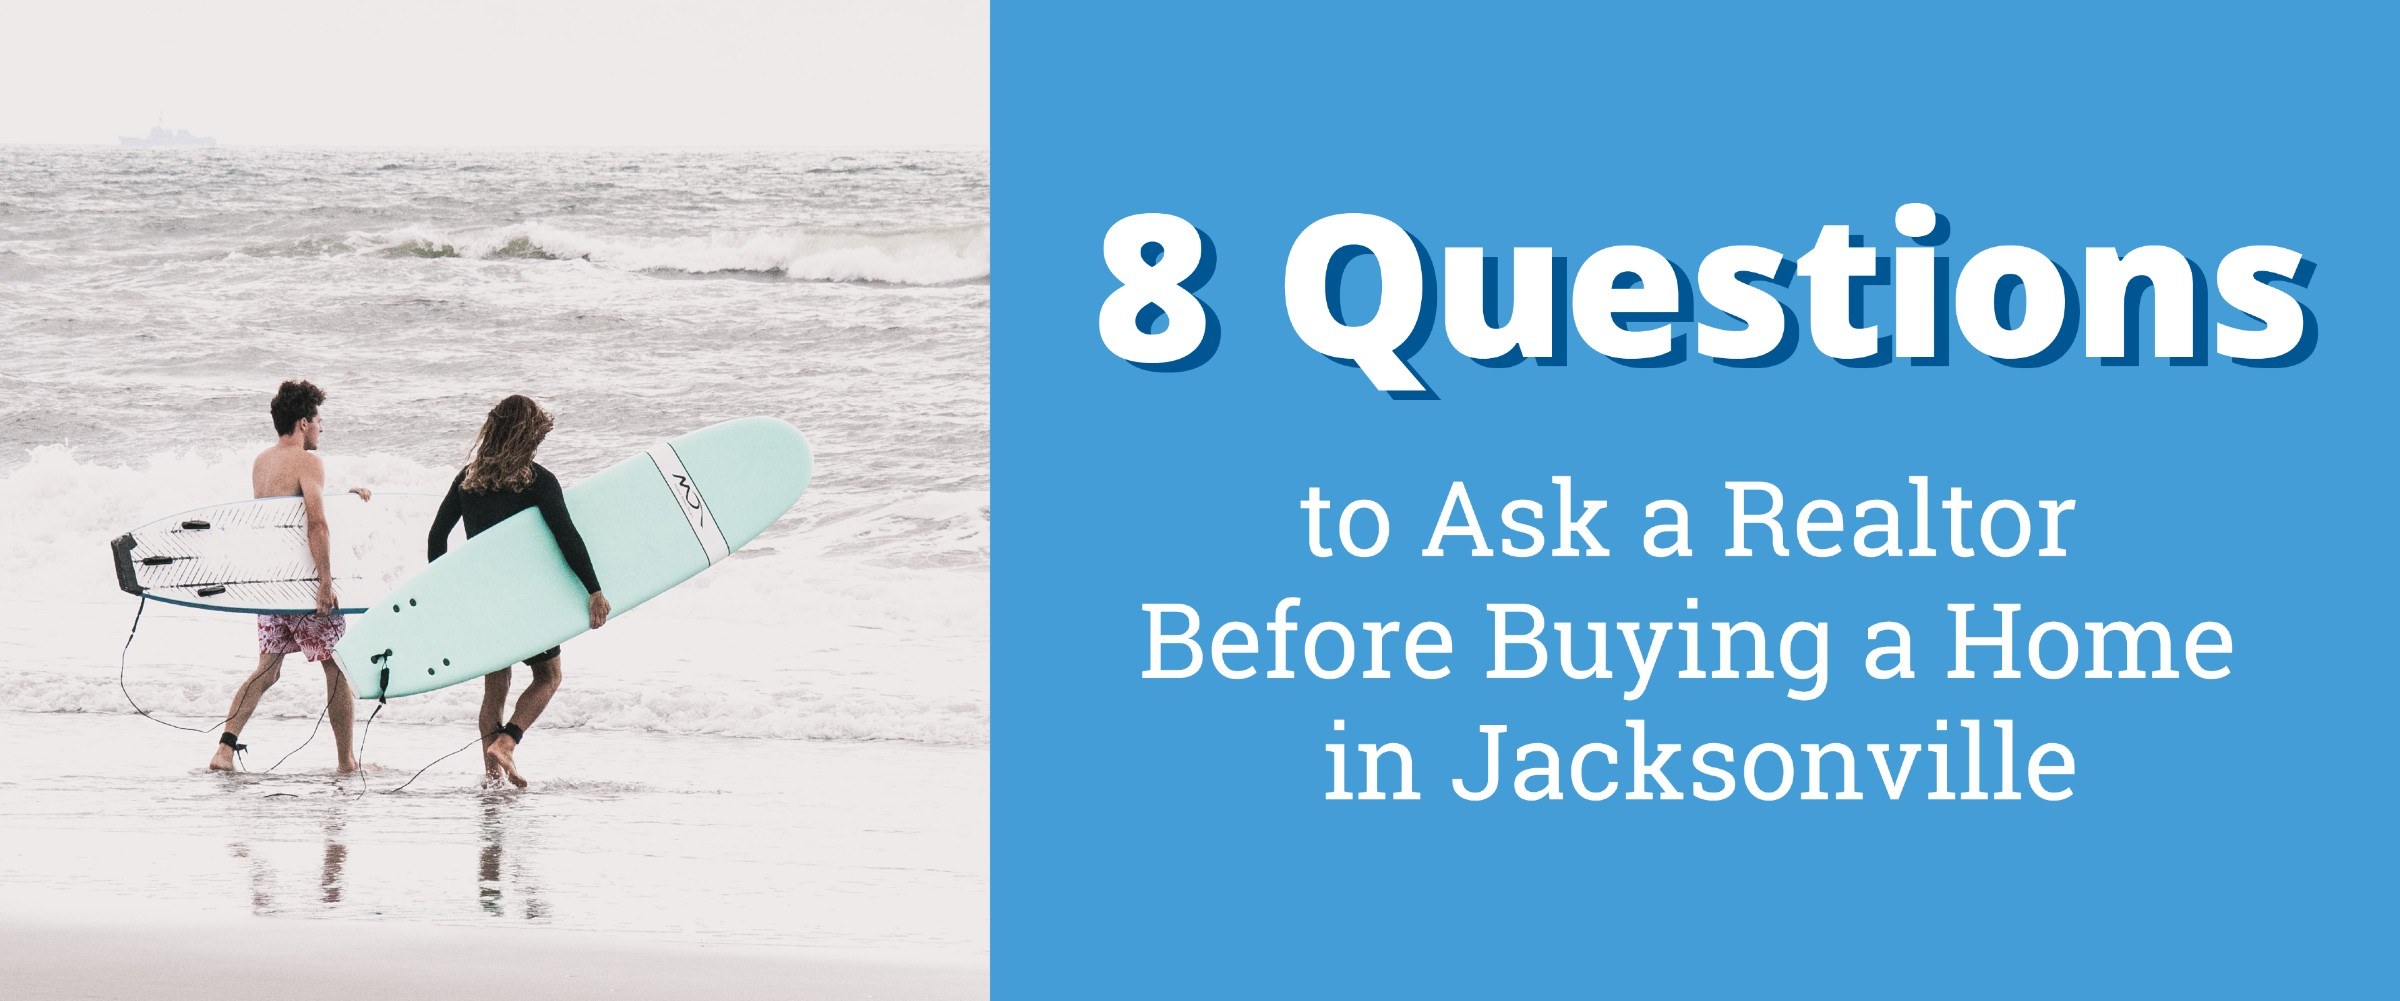 home buyers asking their agent questions in Jacksonville, FL